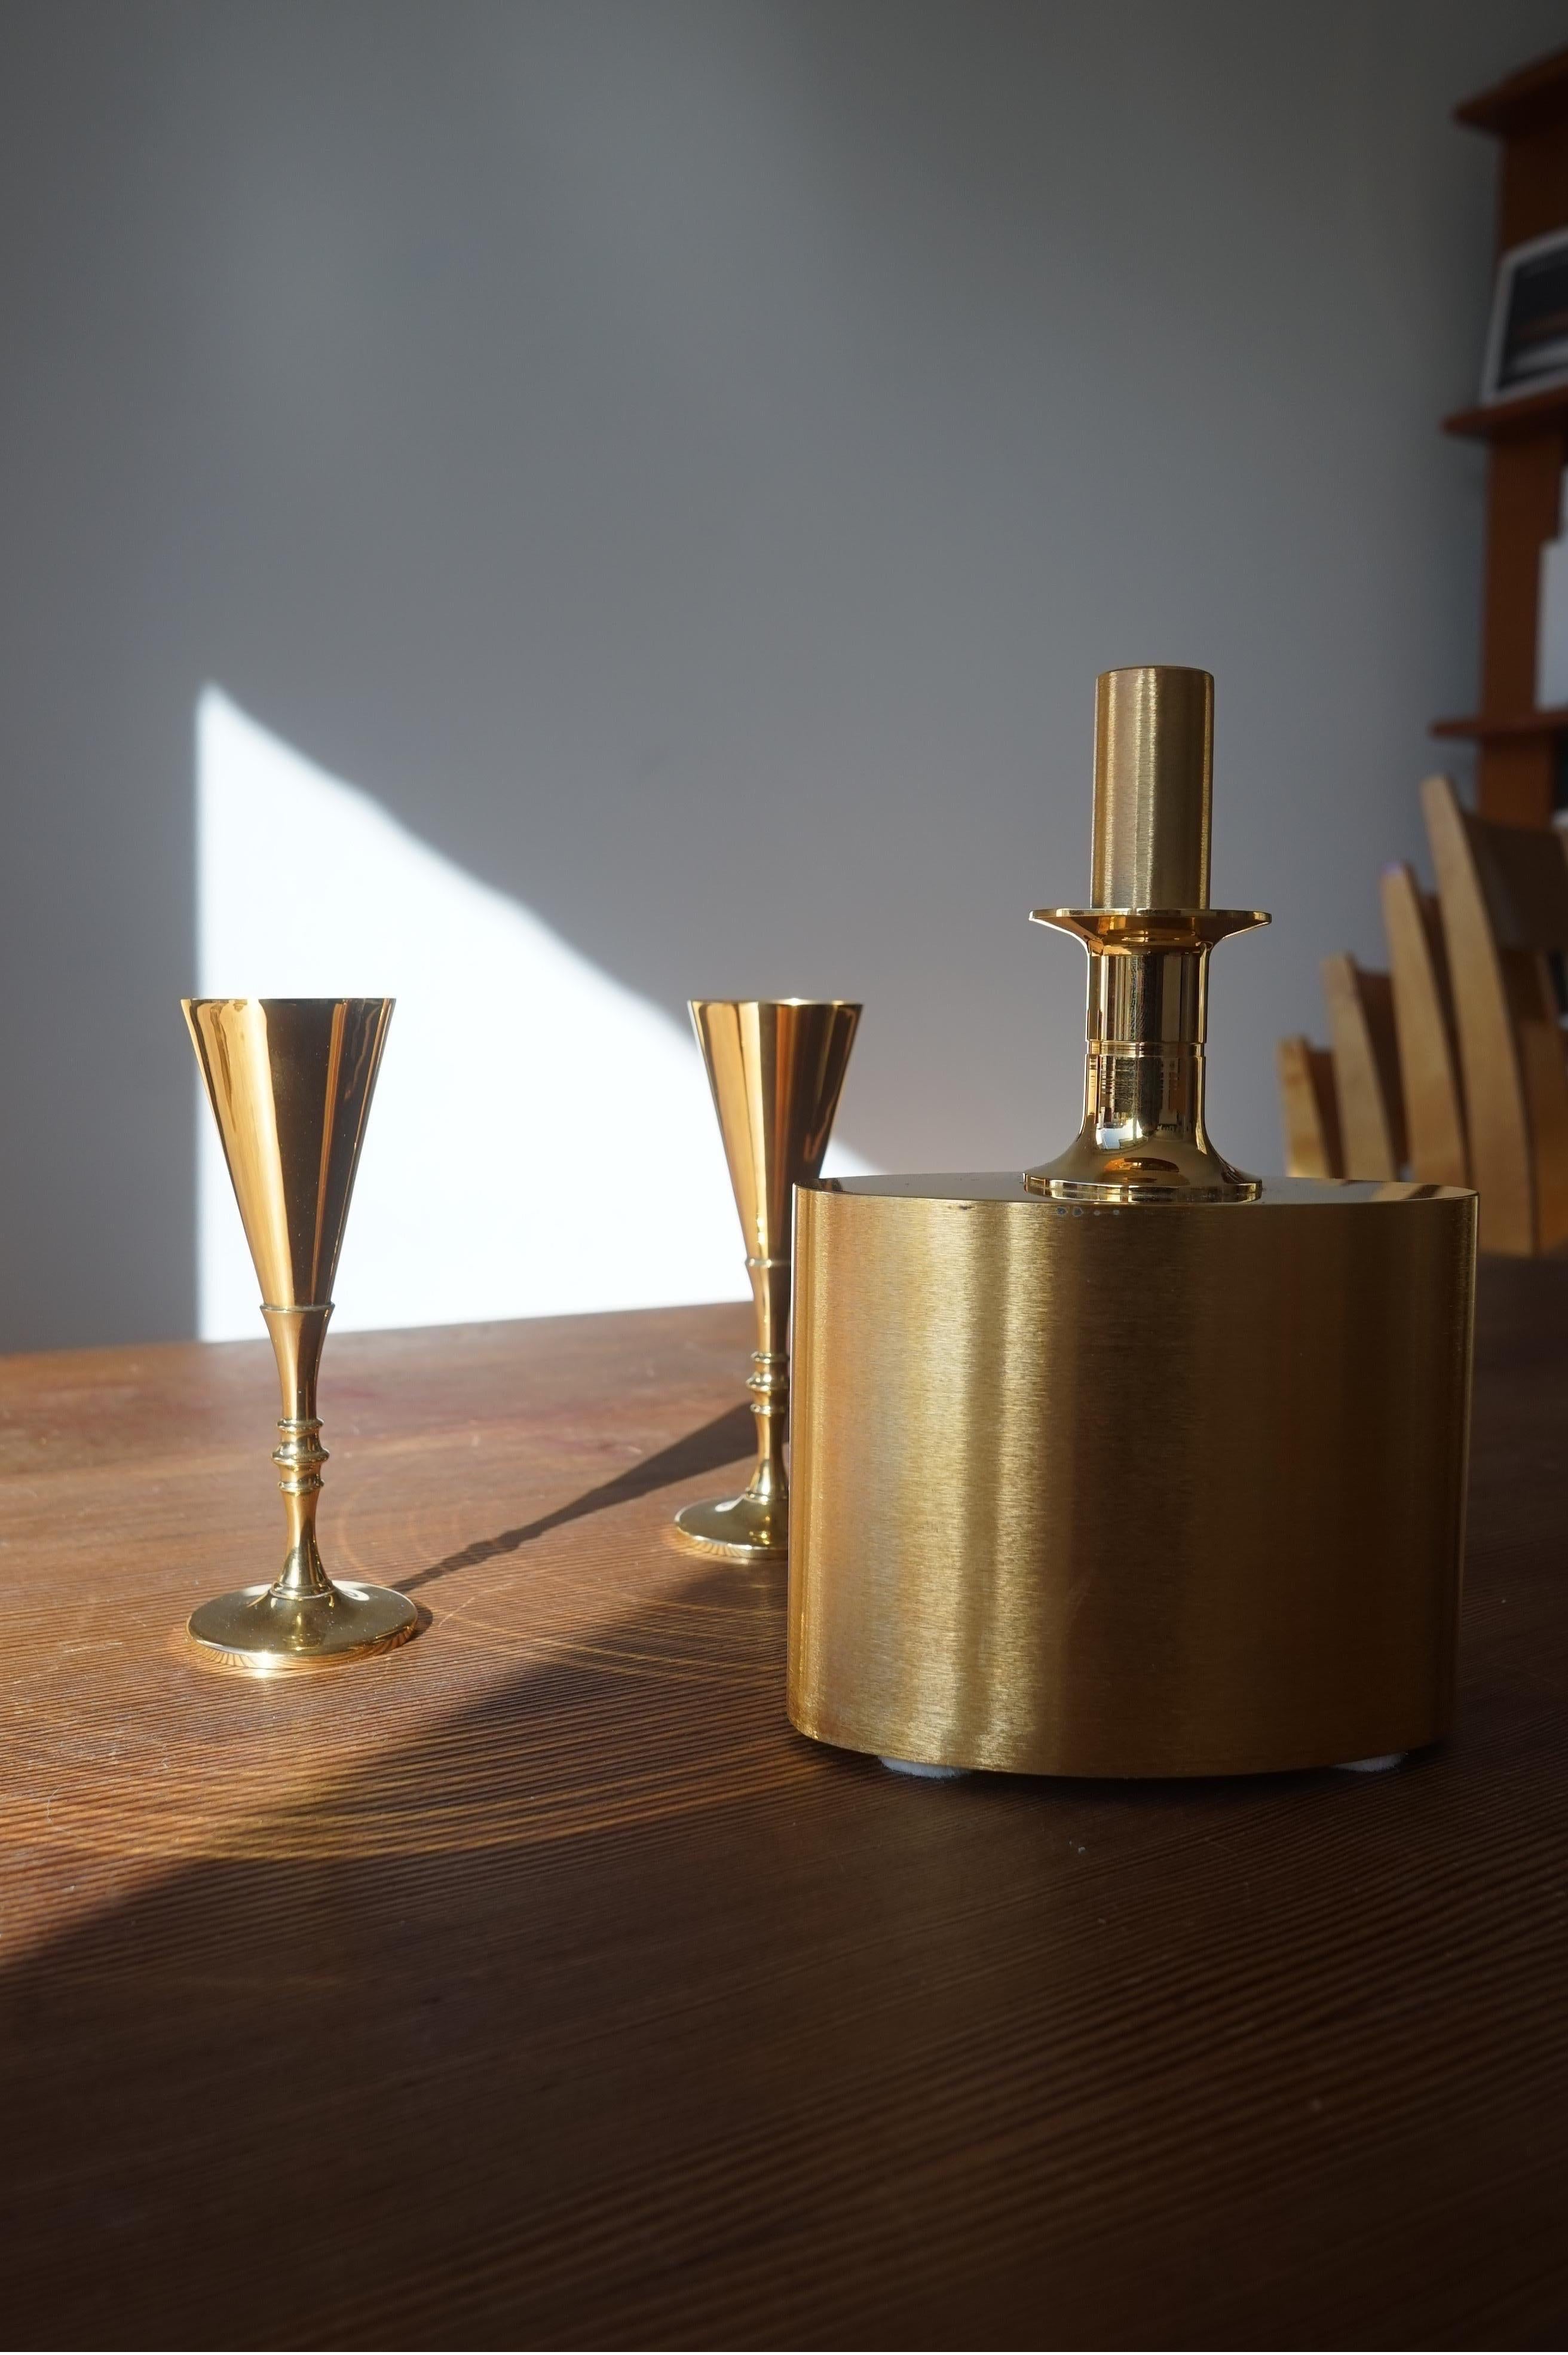 Pierre Forssell decanter in 24 carat gold plating with two cups in brass all manufactured by Skultuna.
The decanter is designed by the Swedish designer Pierre Forssell, the brass cups are designed by skultuna’s own in house designers.

Pierre